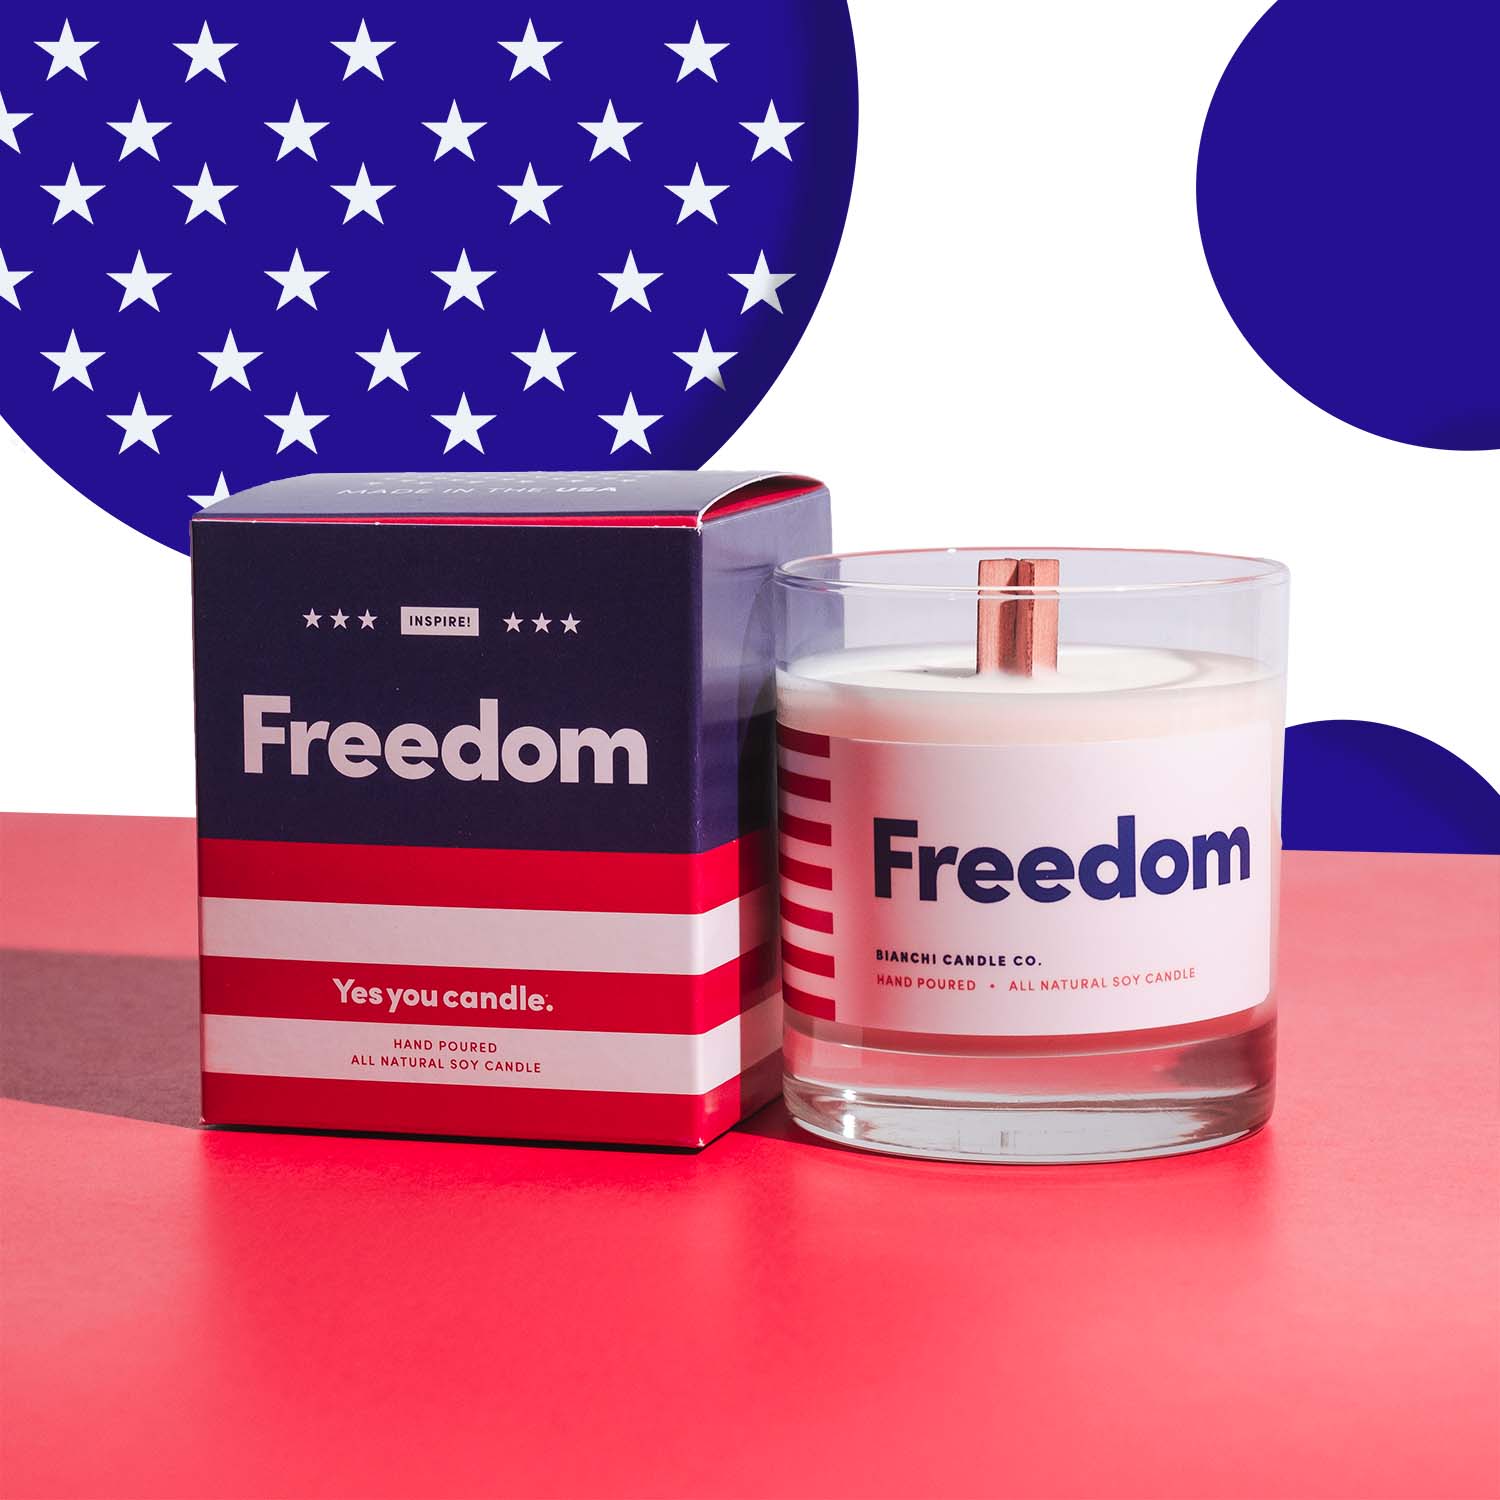 Yes You Candle - Freedom, Inspirational 9.5oz Highly-Scented Soy Candle, Made in USA, Pure Essential Oils, Aromatherapy, 100% PU